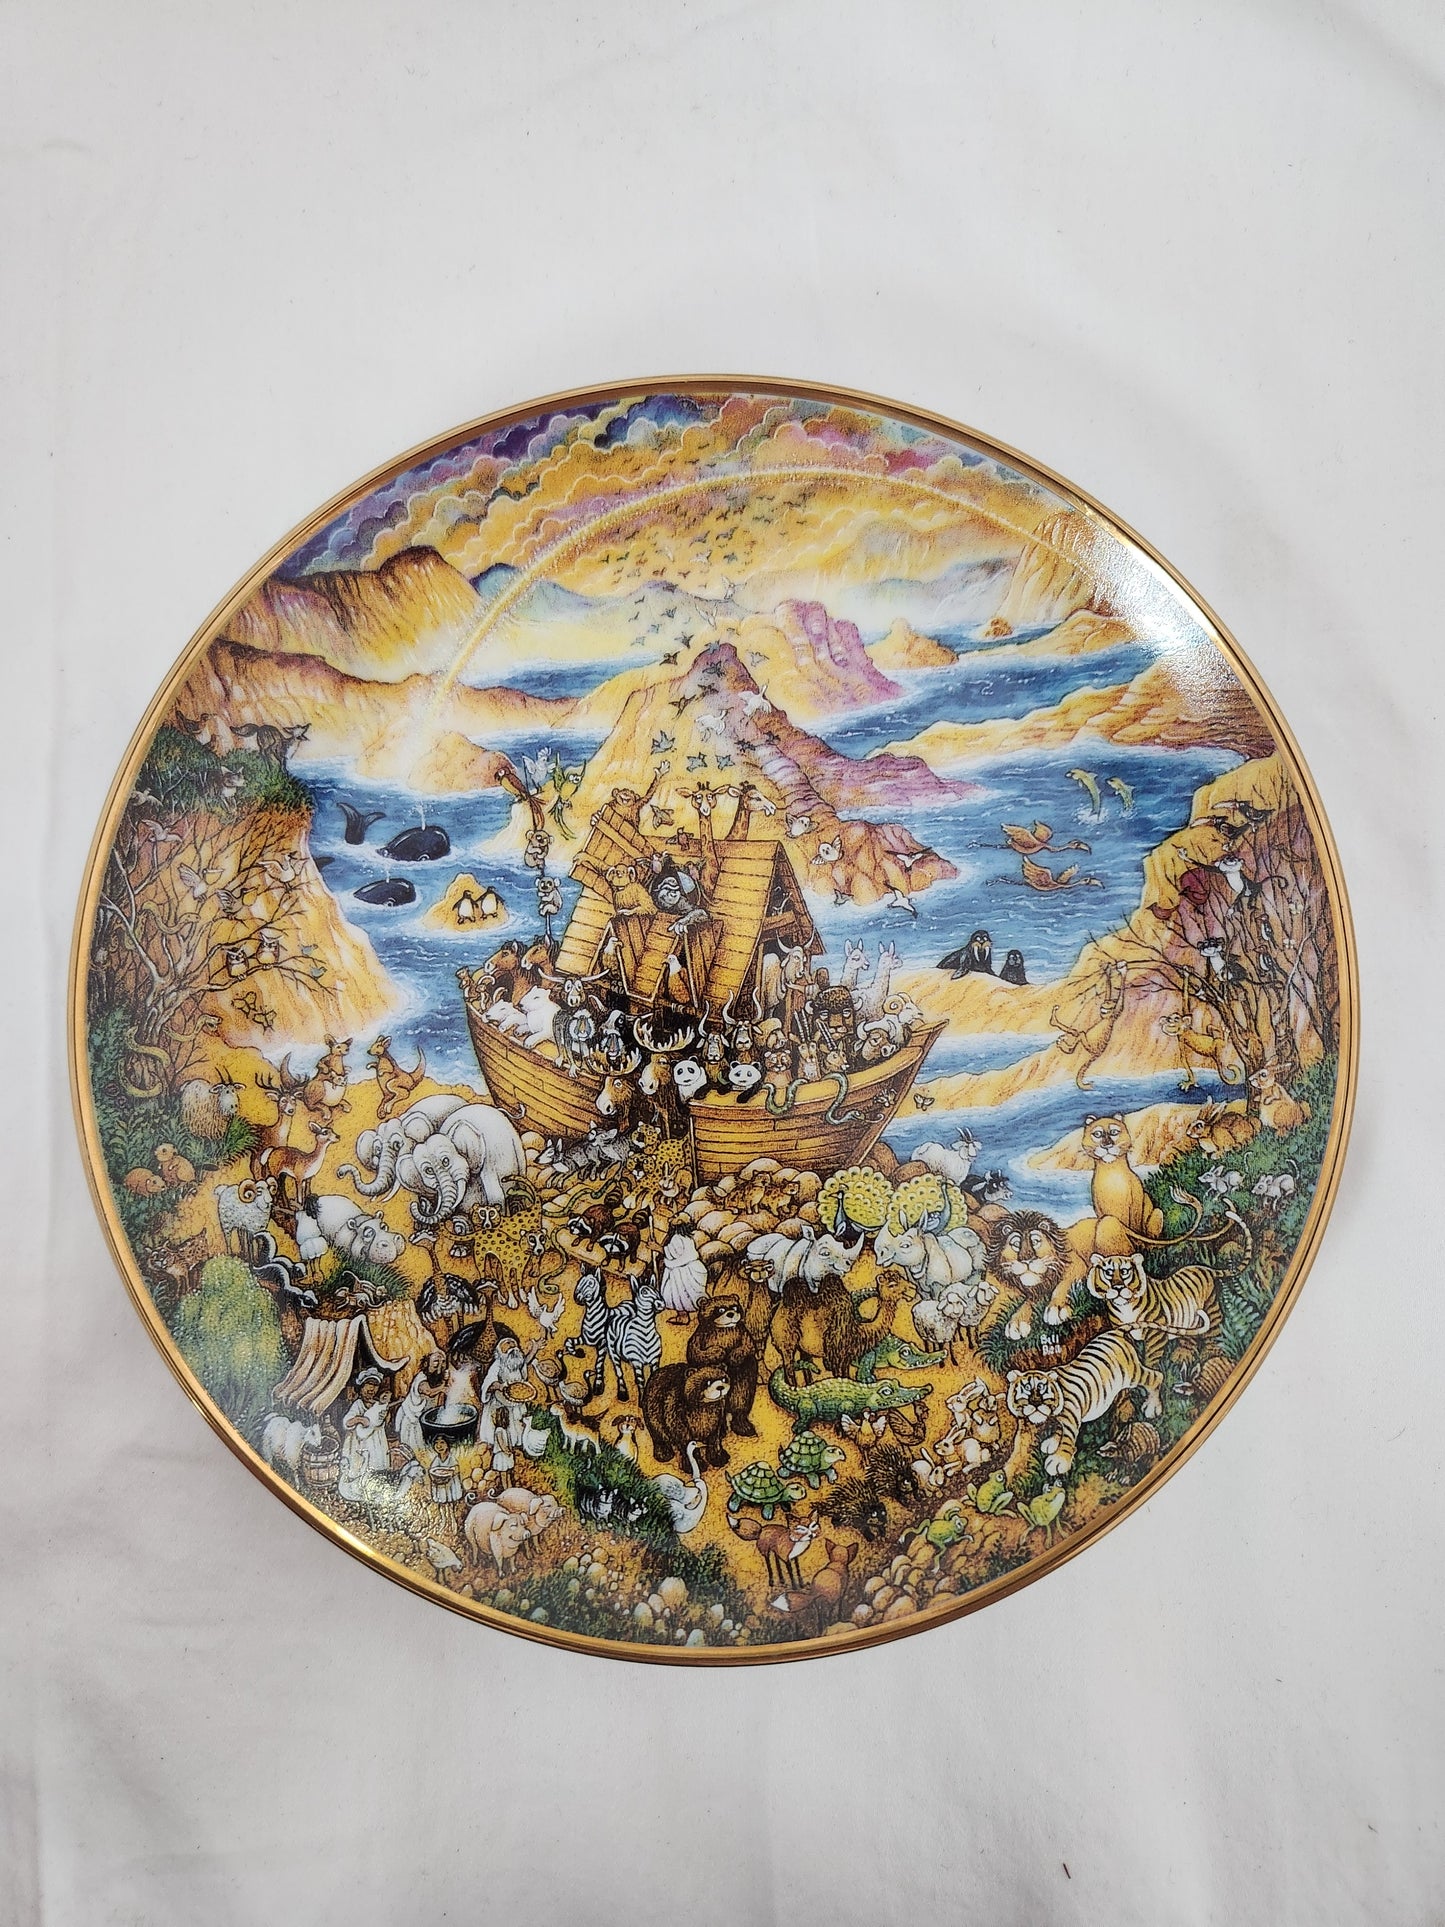 1991- limited Edition "Two by Two" Decorative Plate by Bill Bell - Plate #R2544